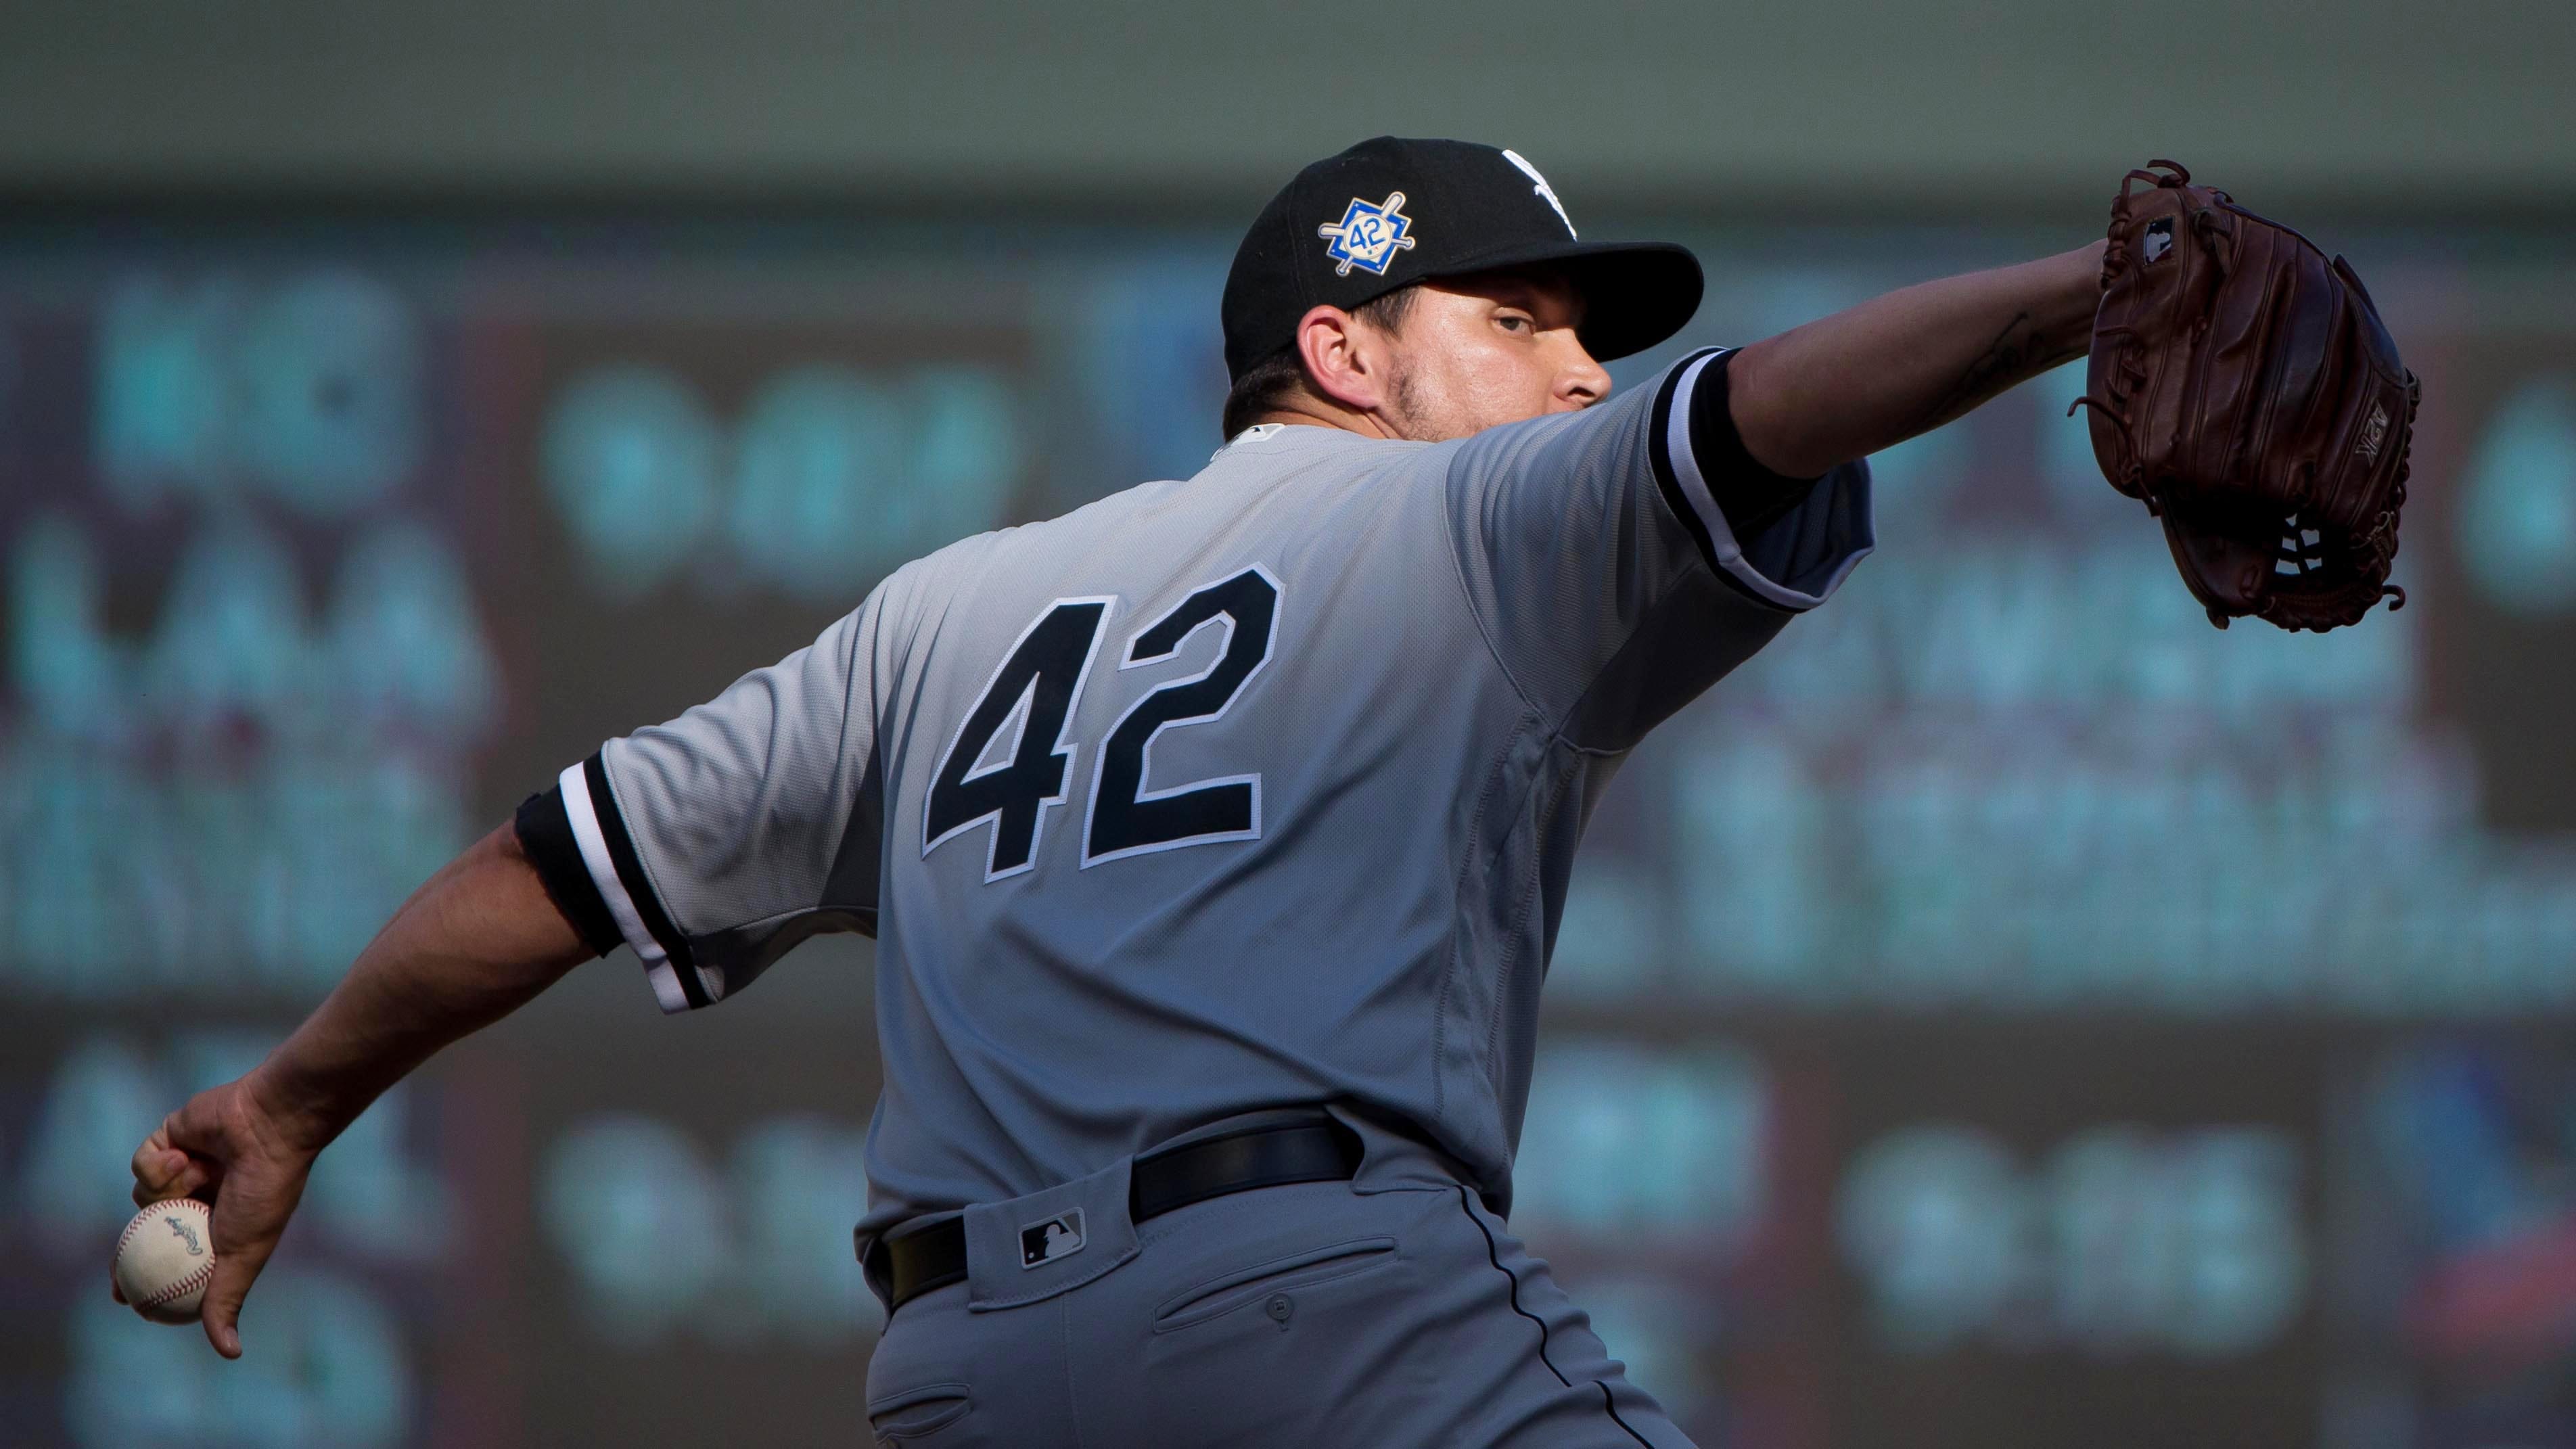 Chicago White Sox relief pitcher Luis Avilan pitches in the eighth inning against Minnesota Twins at Target Field in Minneapolis.